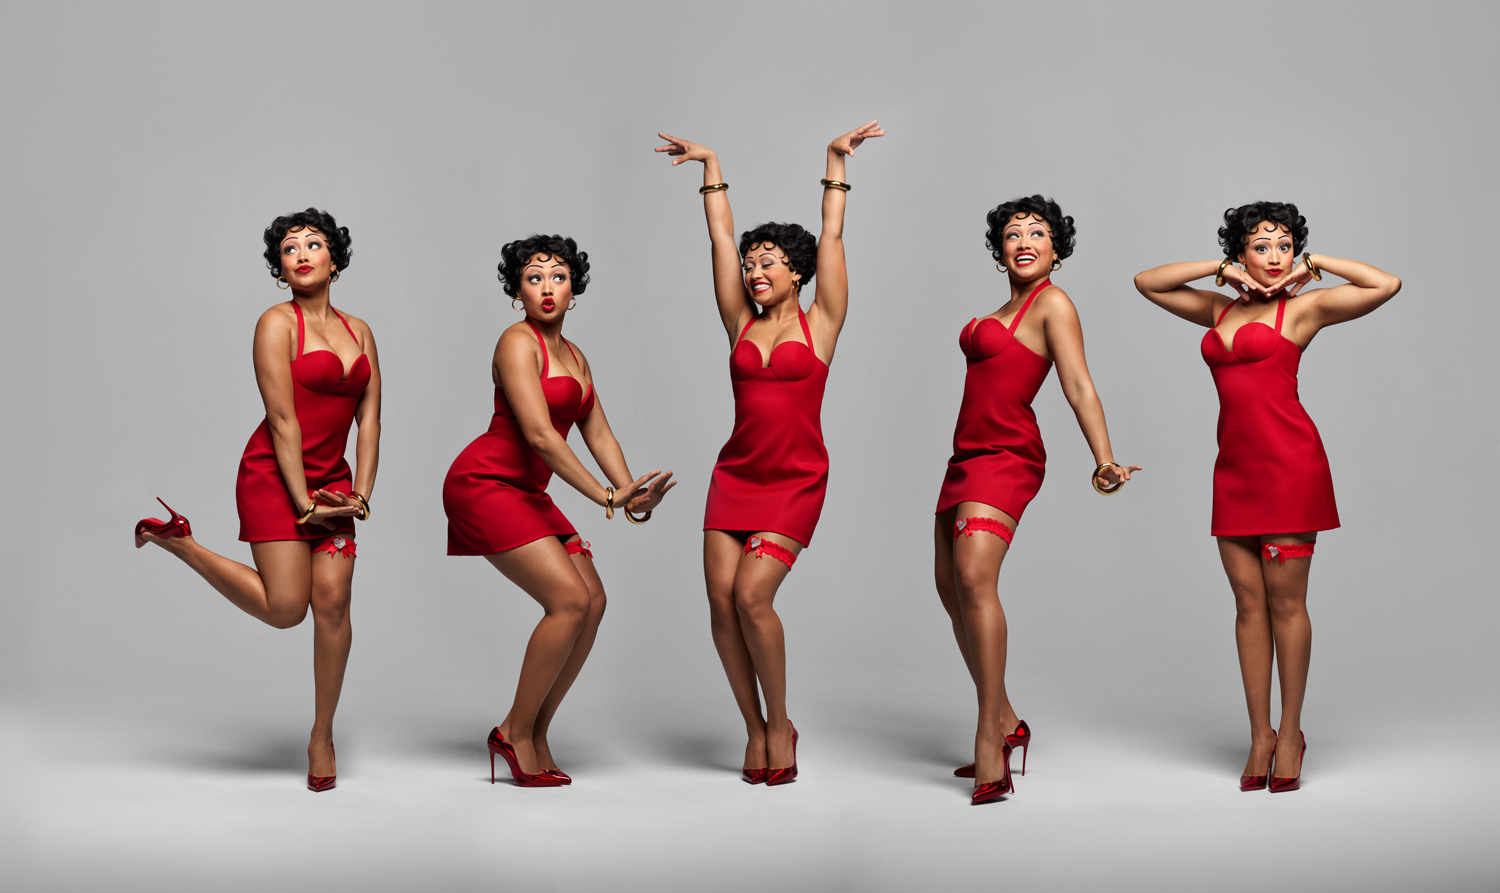 A composite photo showing five images of Rogers—costumed as Betty Boop in a short red dress, garter and heels—striking a series of flirtatious poses.